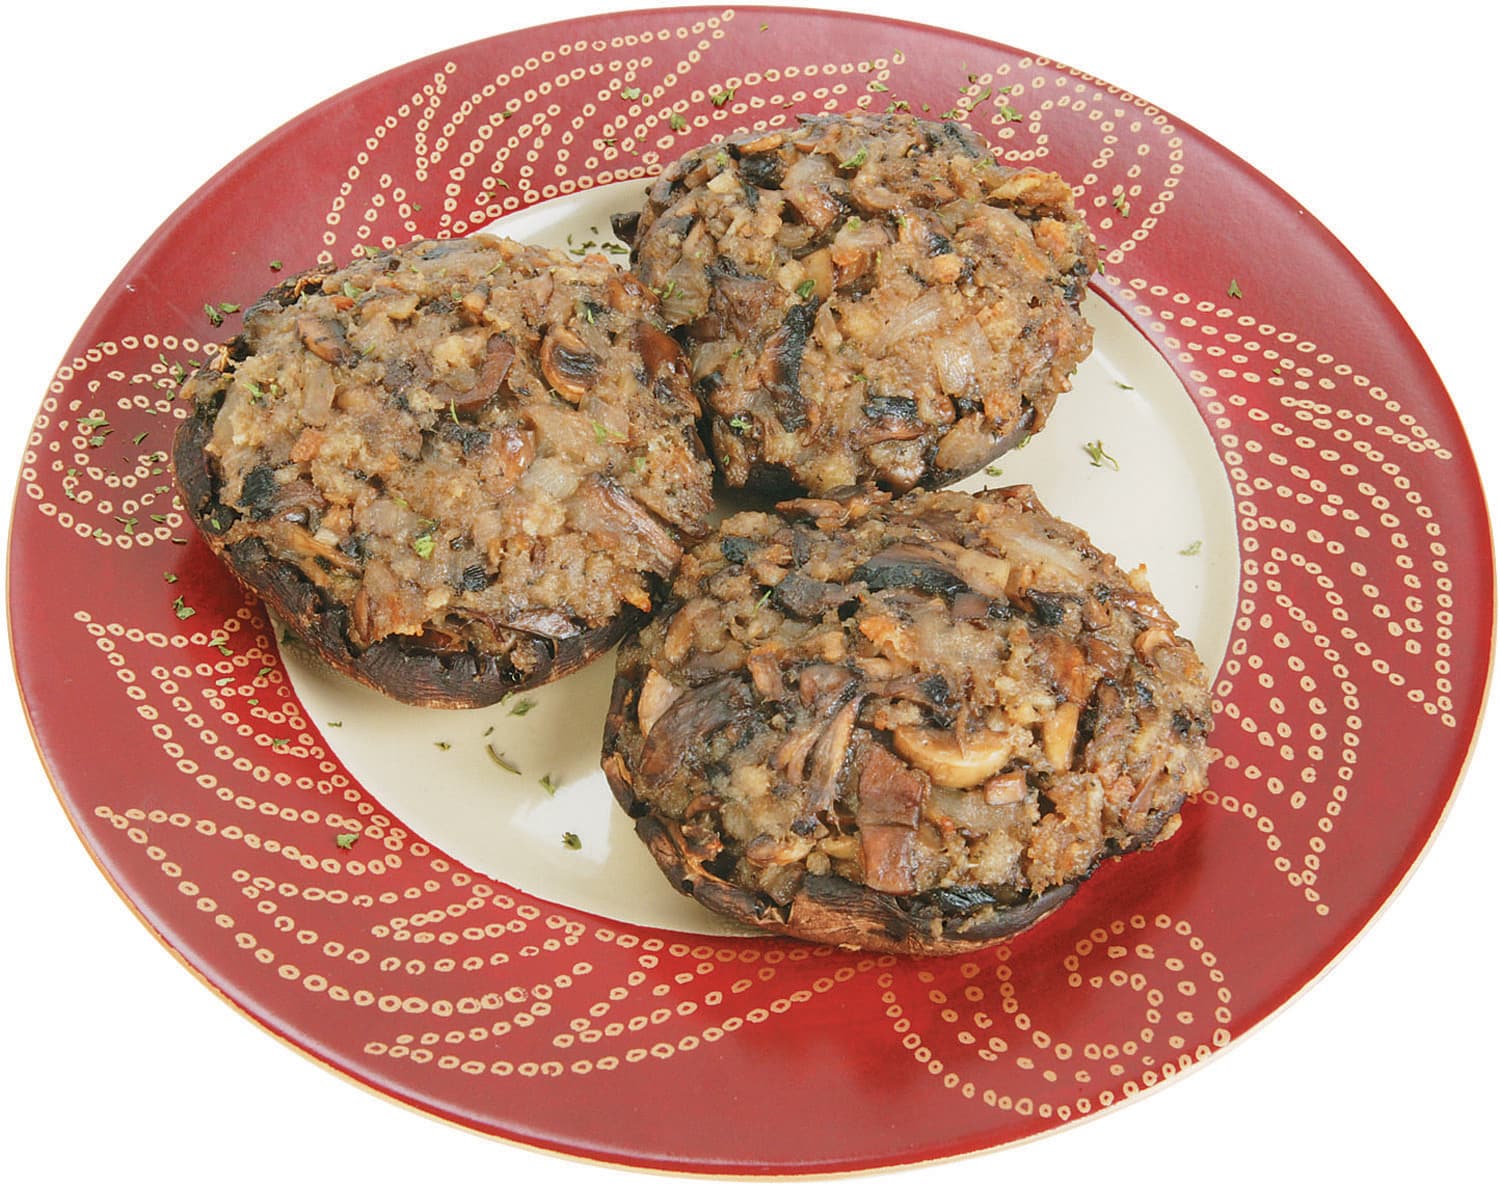 Stuffed Mushrooms on a Red Plate Food Picture